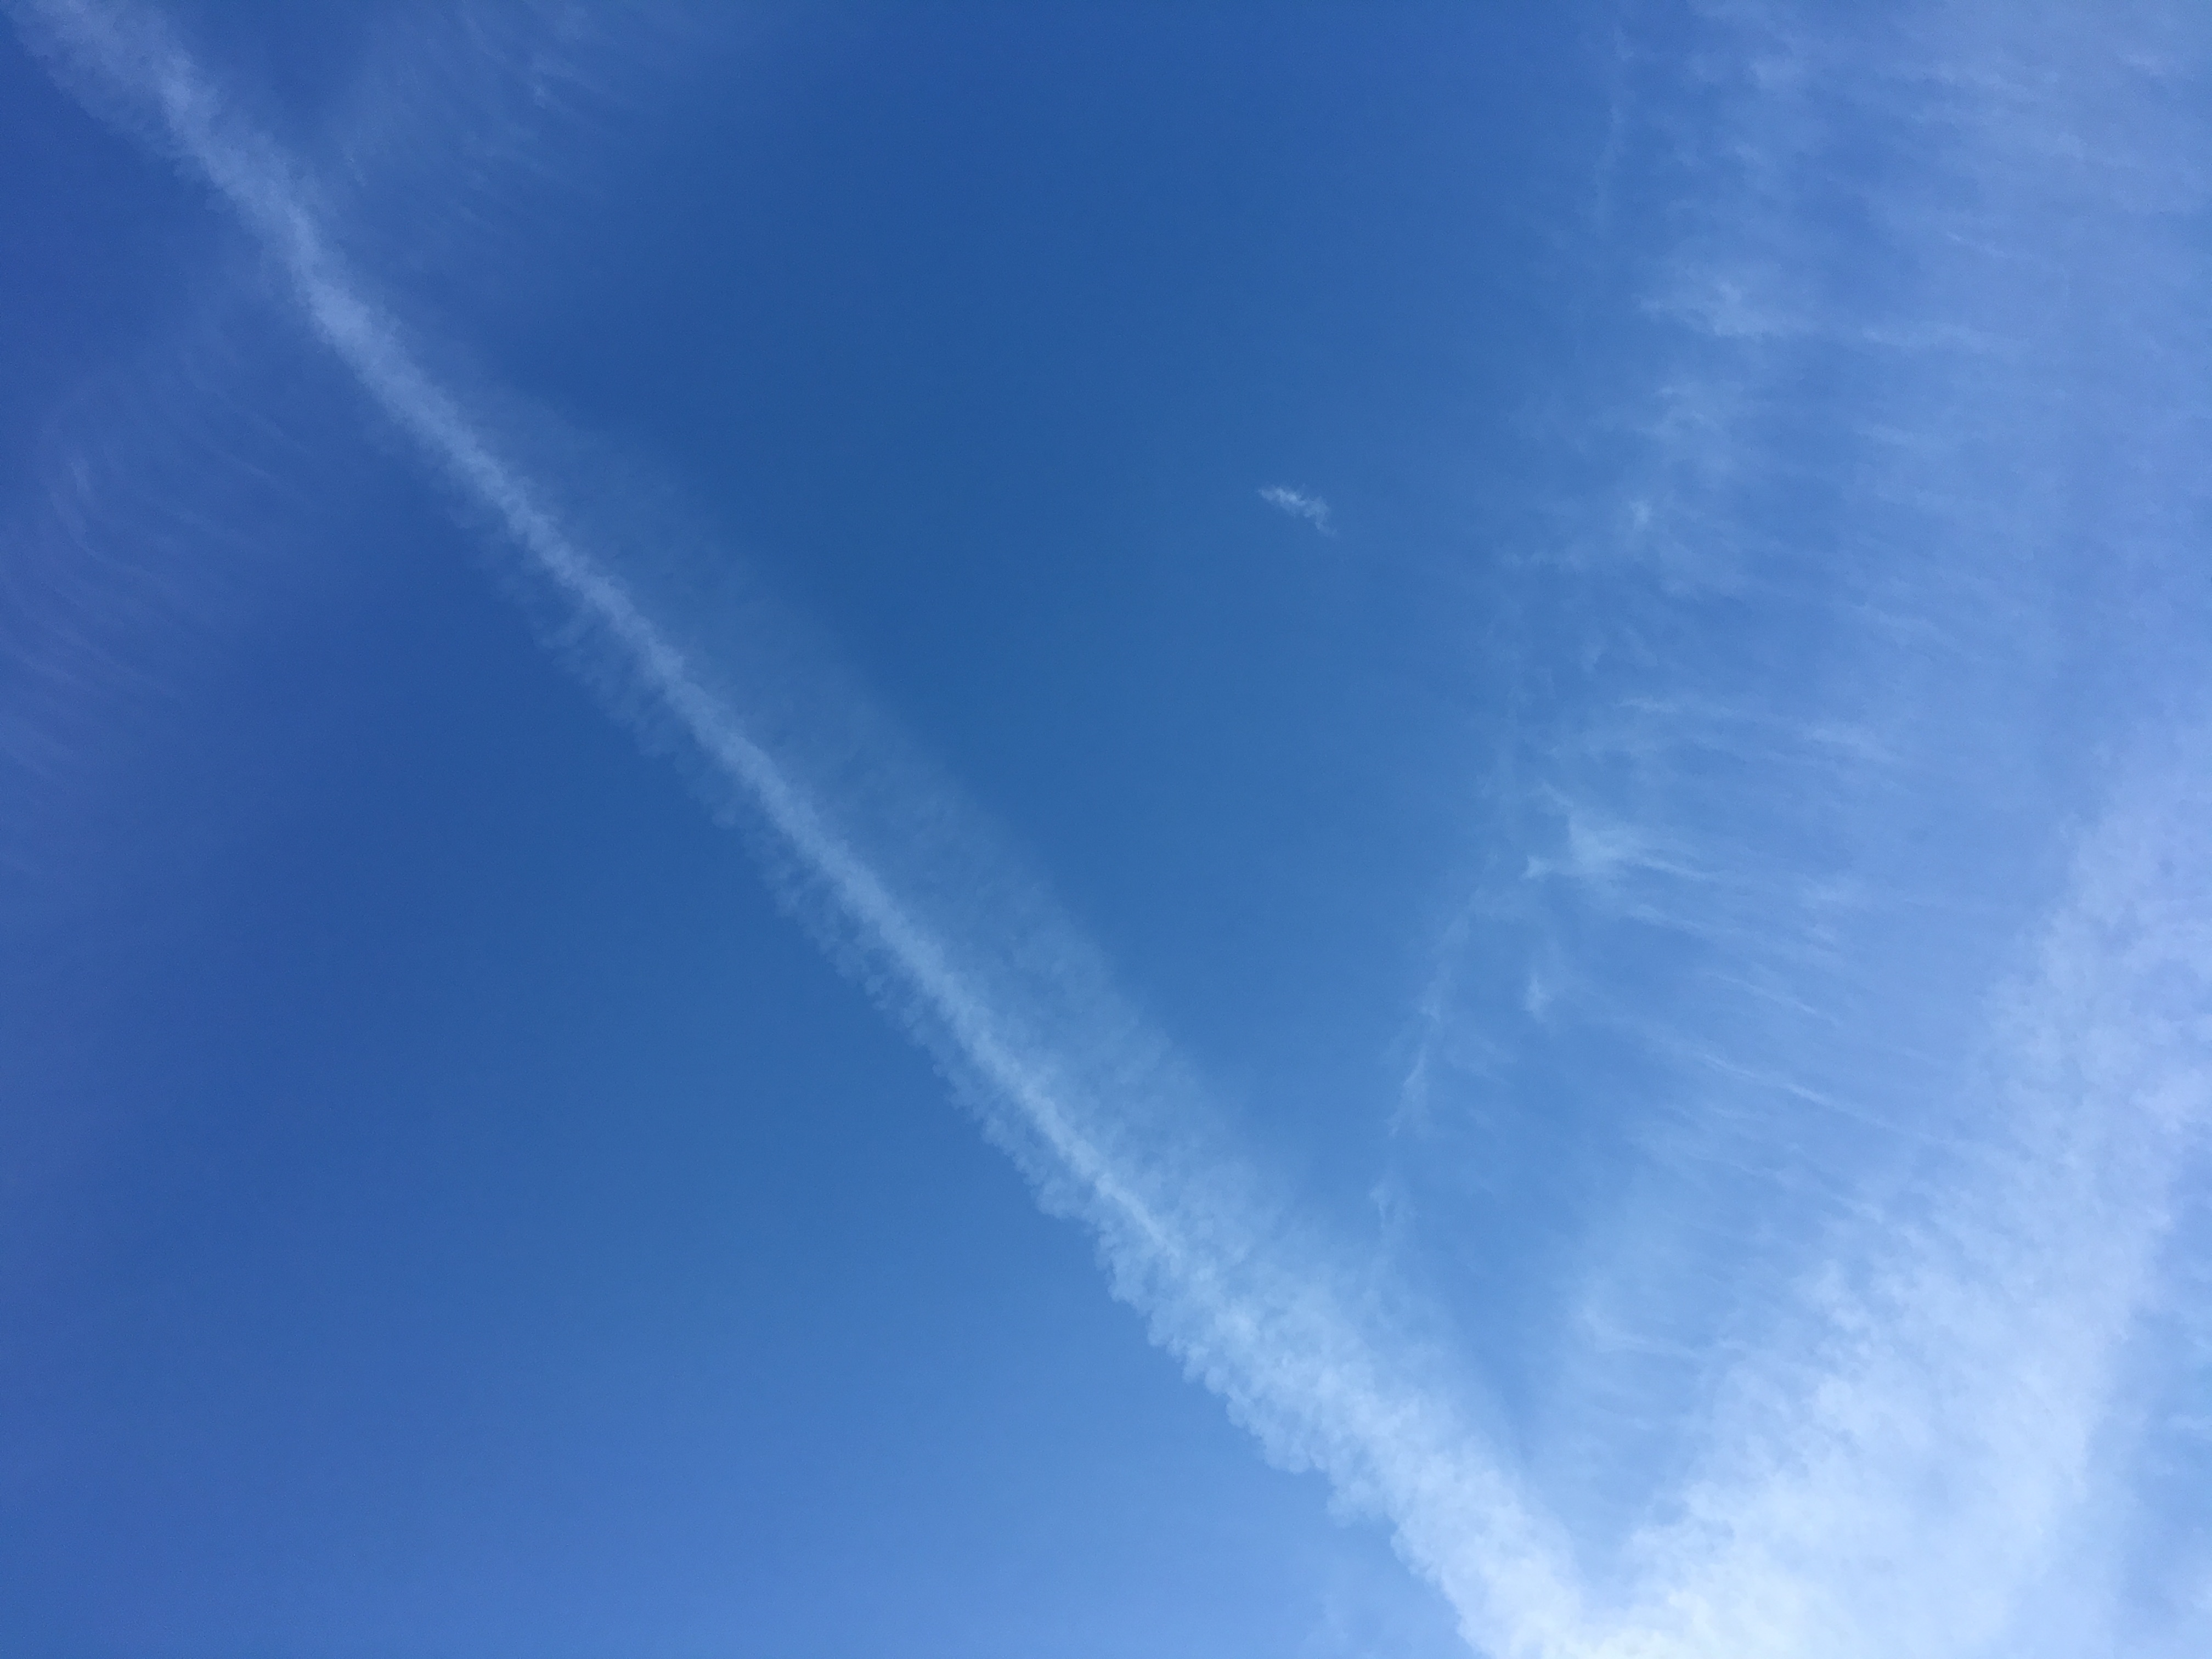 Two bands of contrails across a blue sky